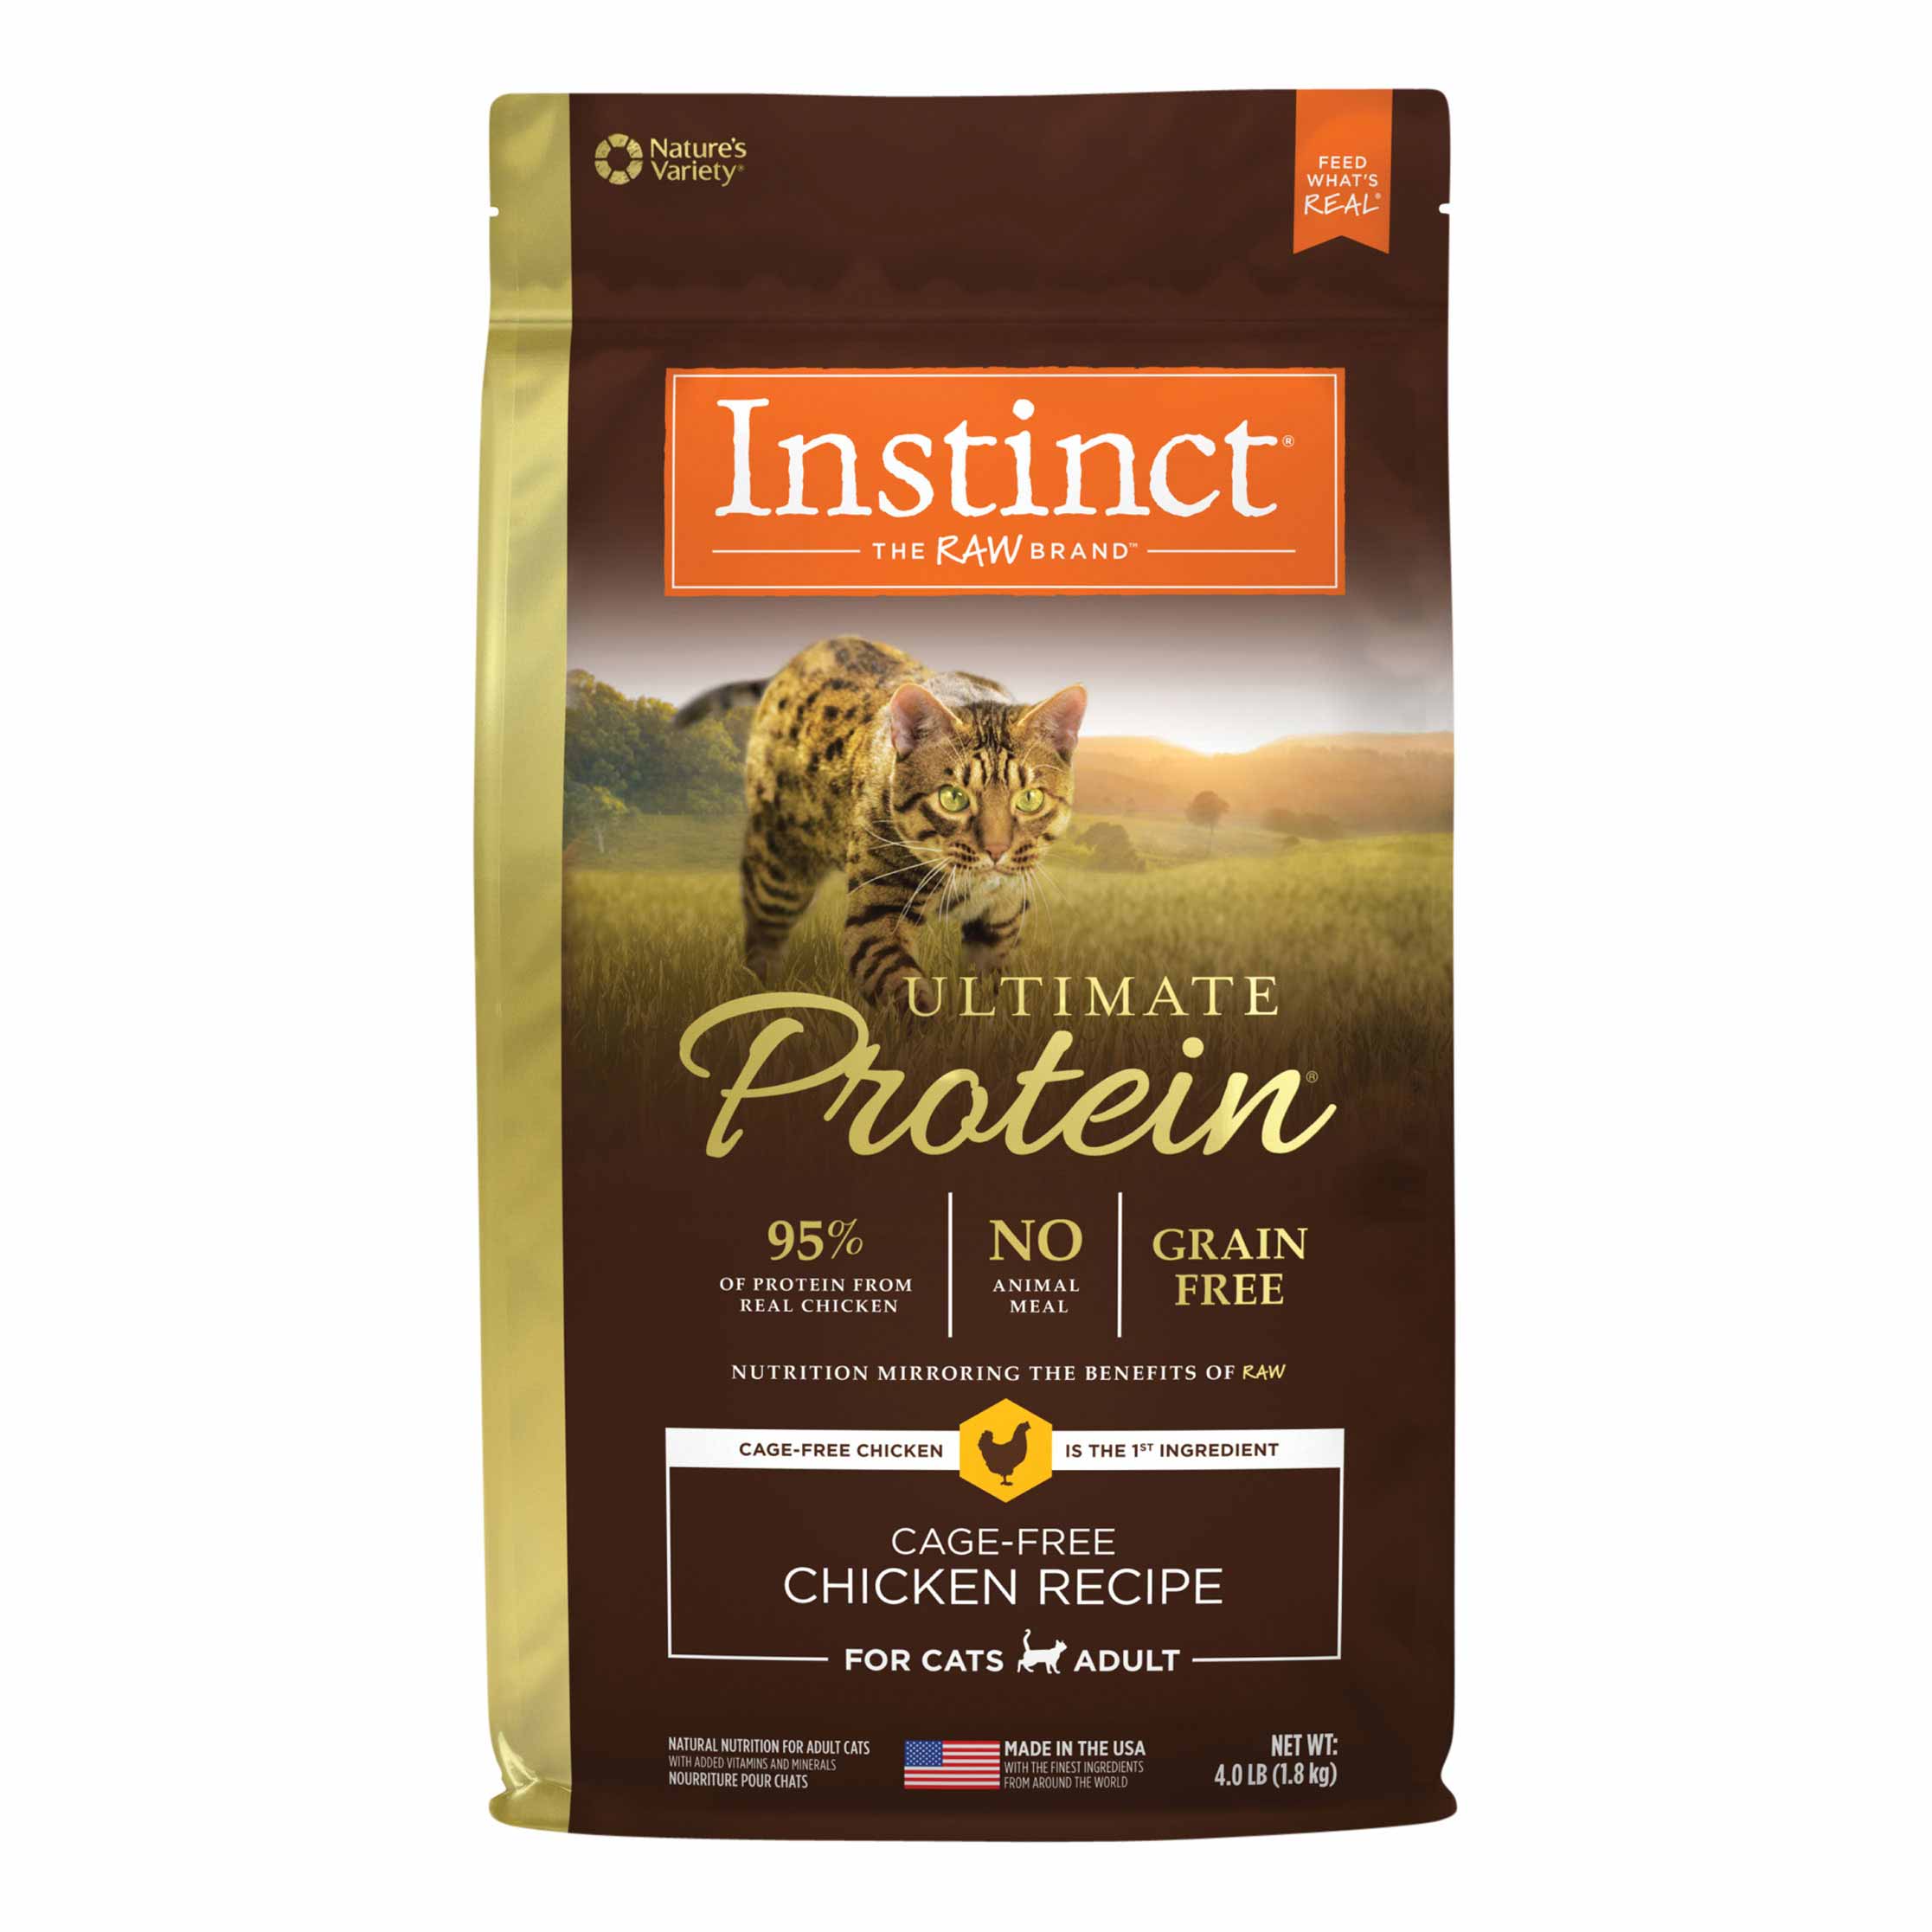 Instinct Ultimate Protein Grain-Free Cage-Free Chicken Recipe Freeze-Dried Raw Coated Dry Cat Food, 4 Pound Bag